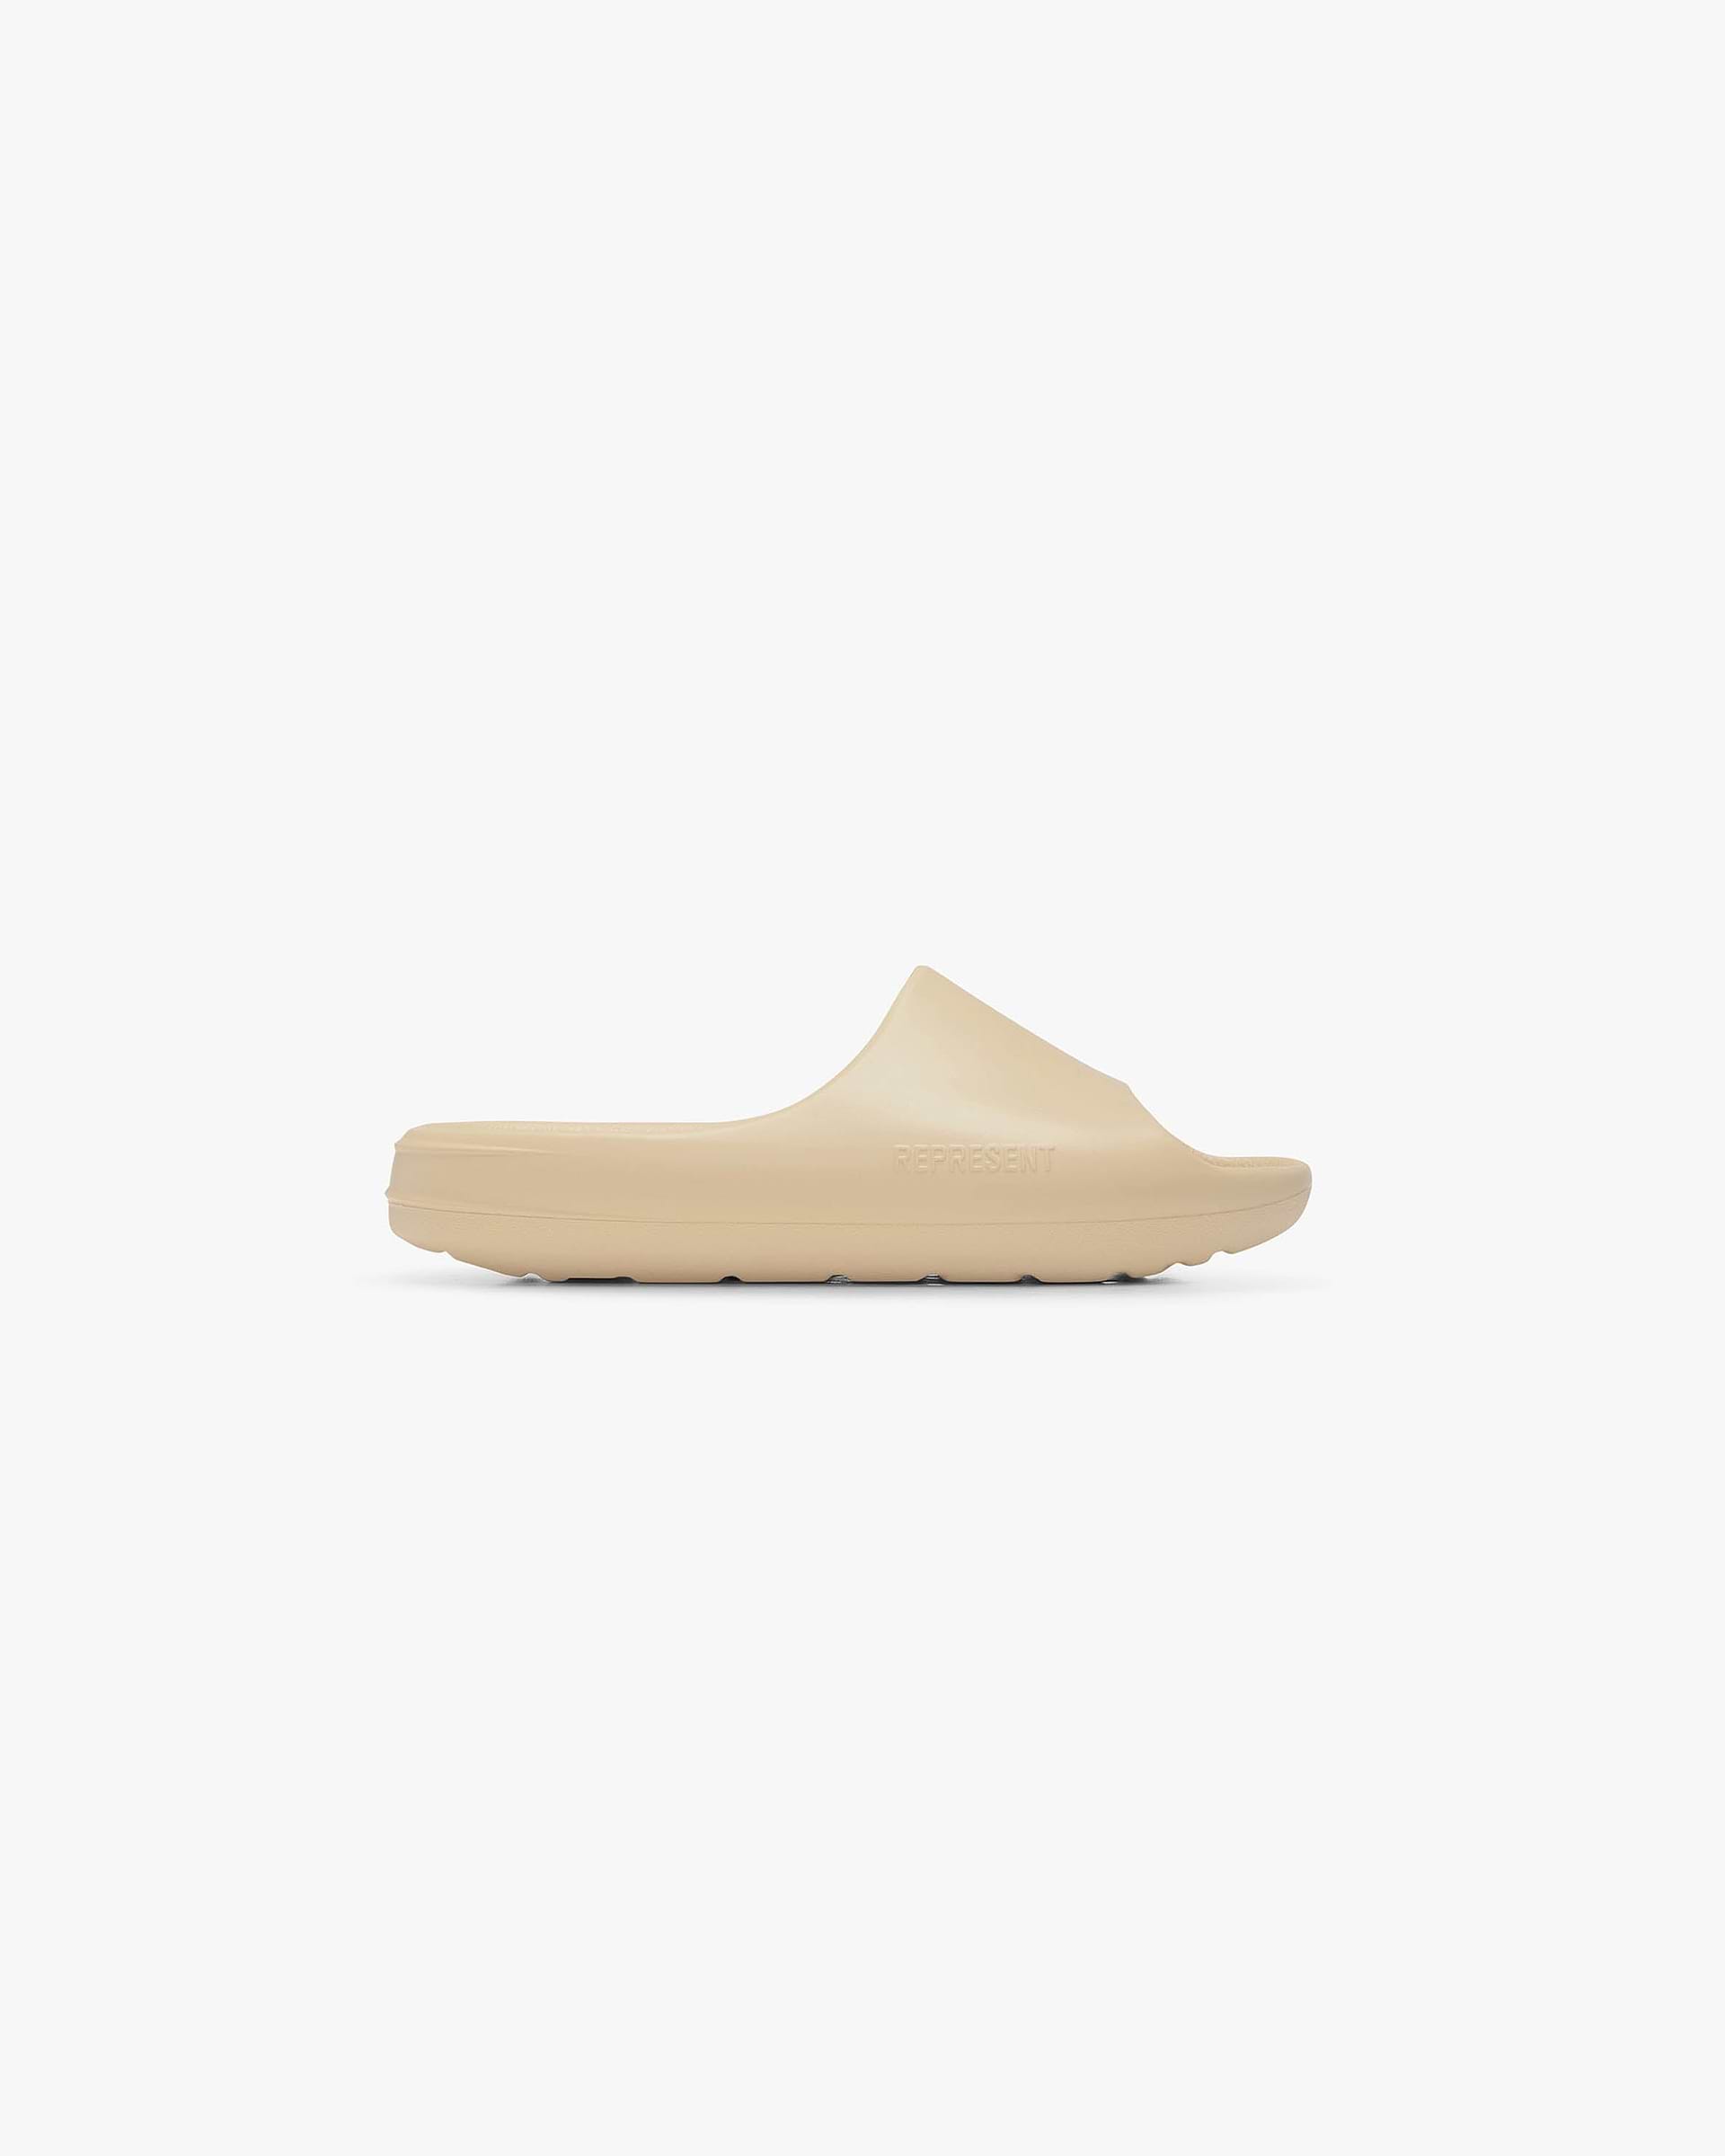 Sliders | Taupe Footwear SS22 | Represent Clo